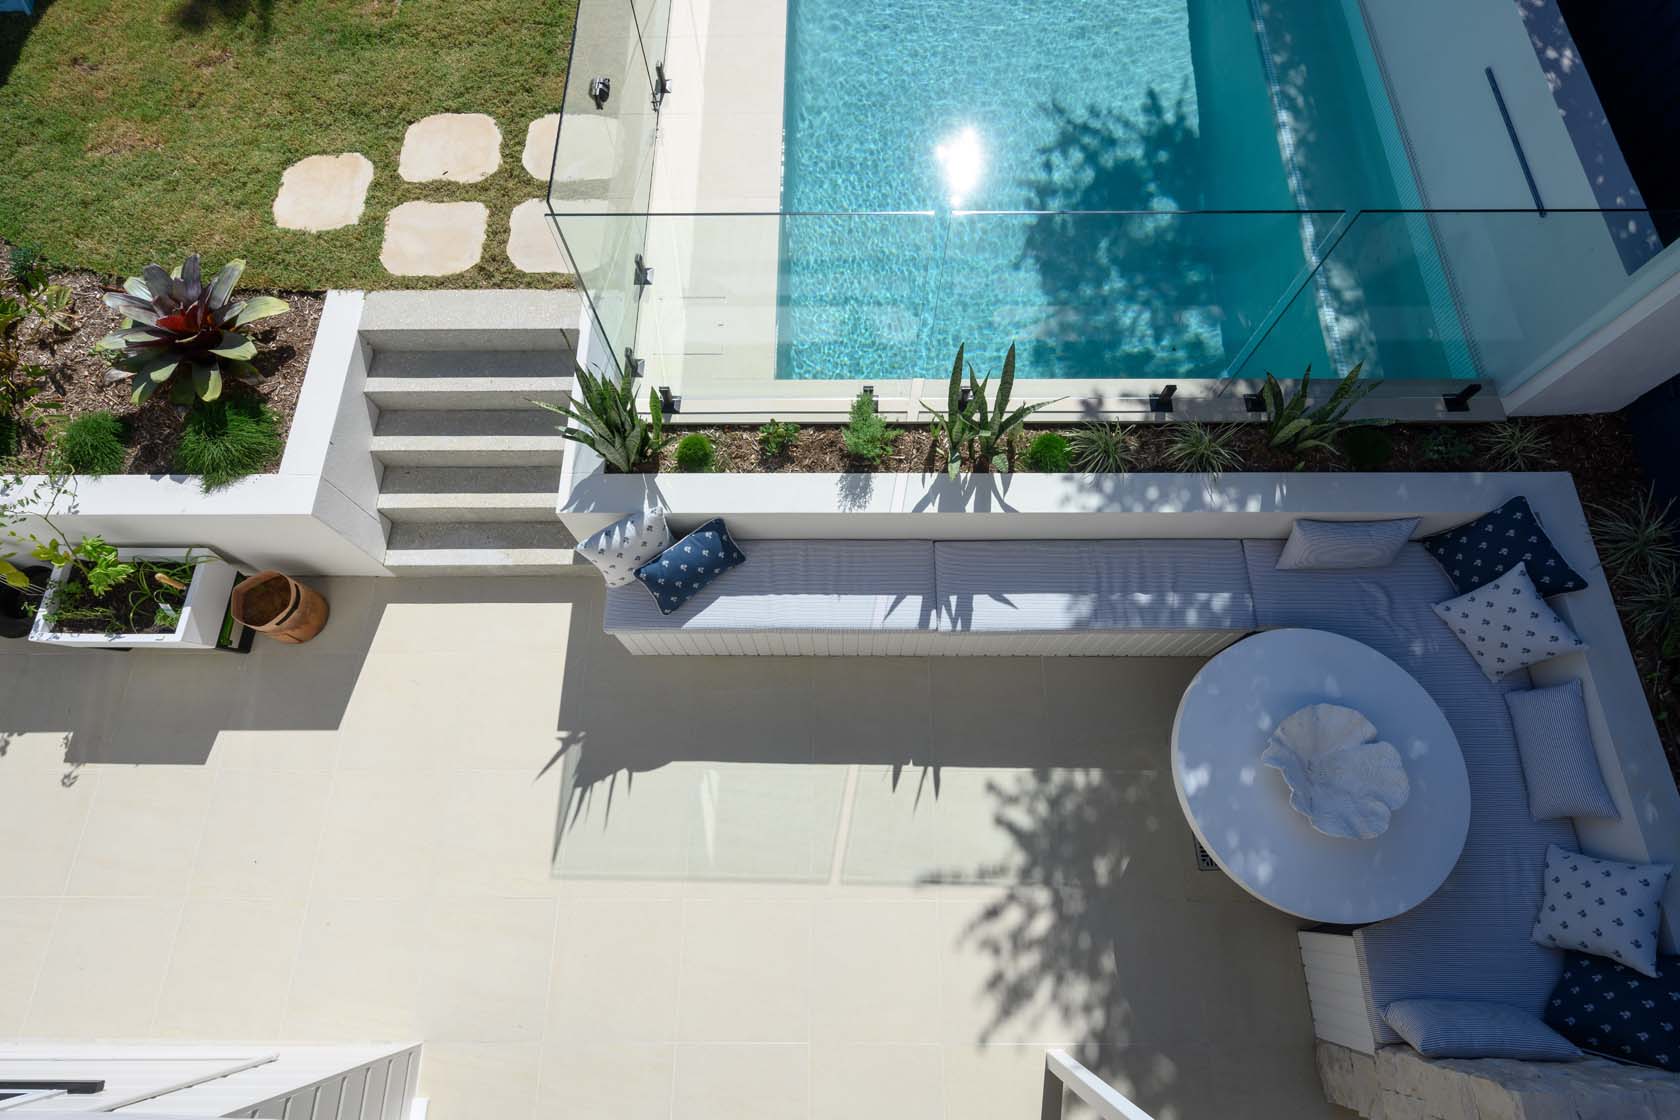 Pluto Porcelain pool coping and patio surround tiles